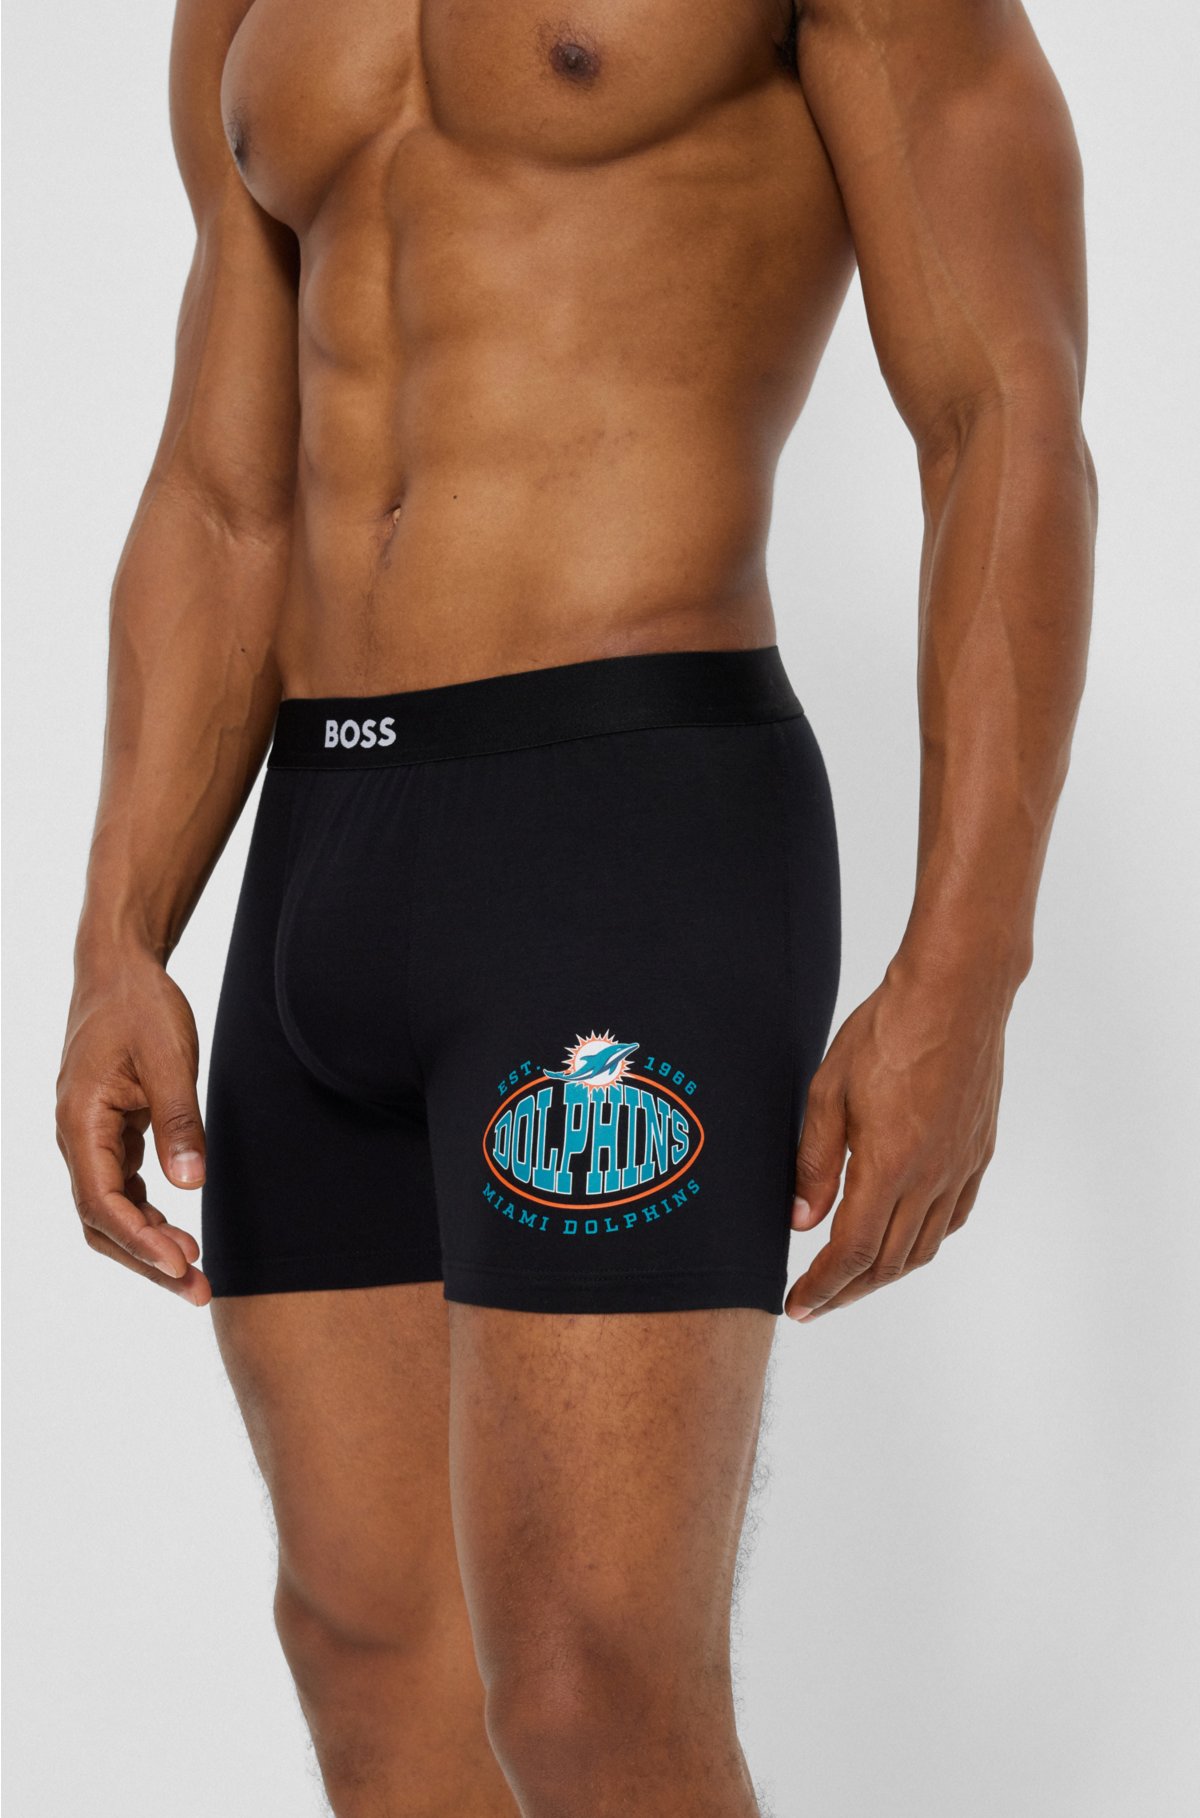 Traditional 100% Cotton Boxer Briefs - 5 Pack BLK 2XL by Boss Hugo Boss